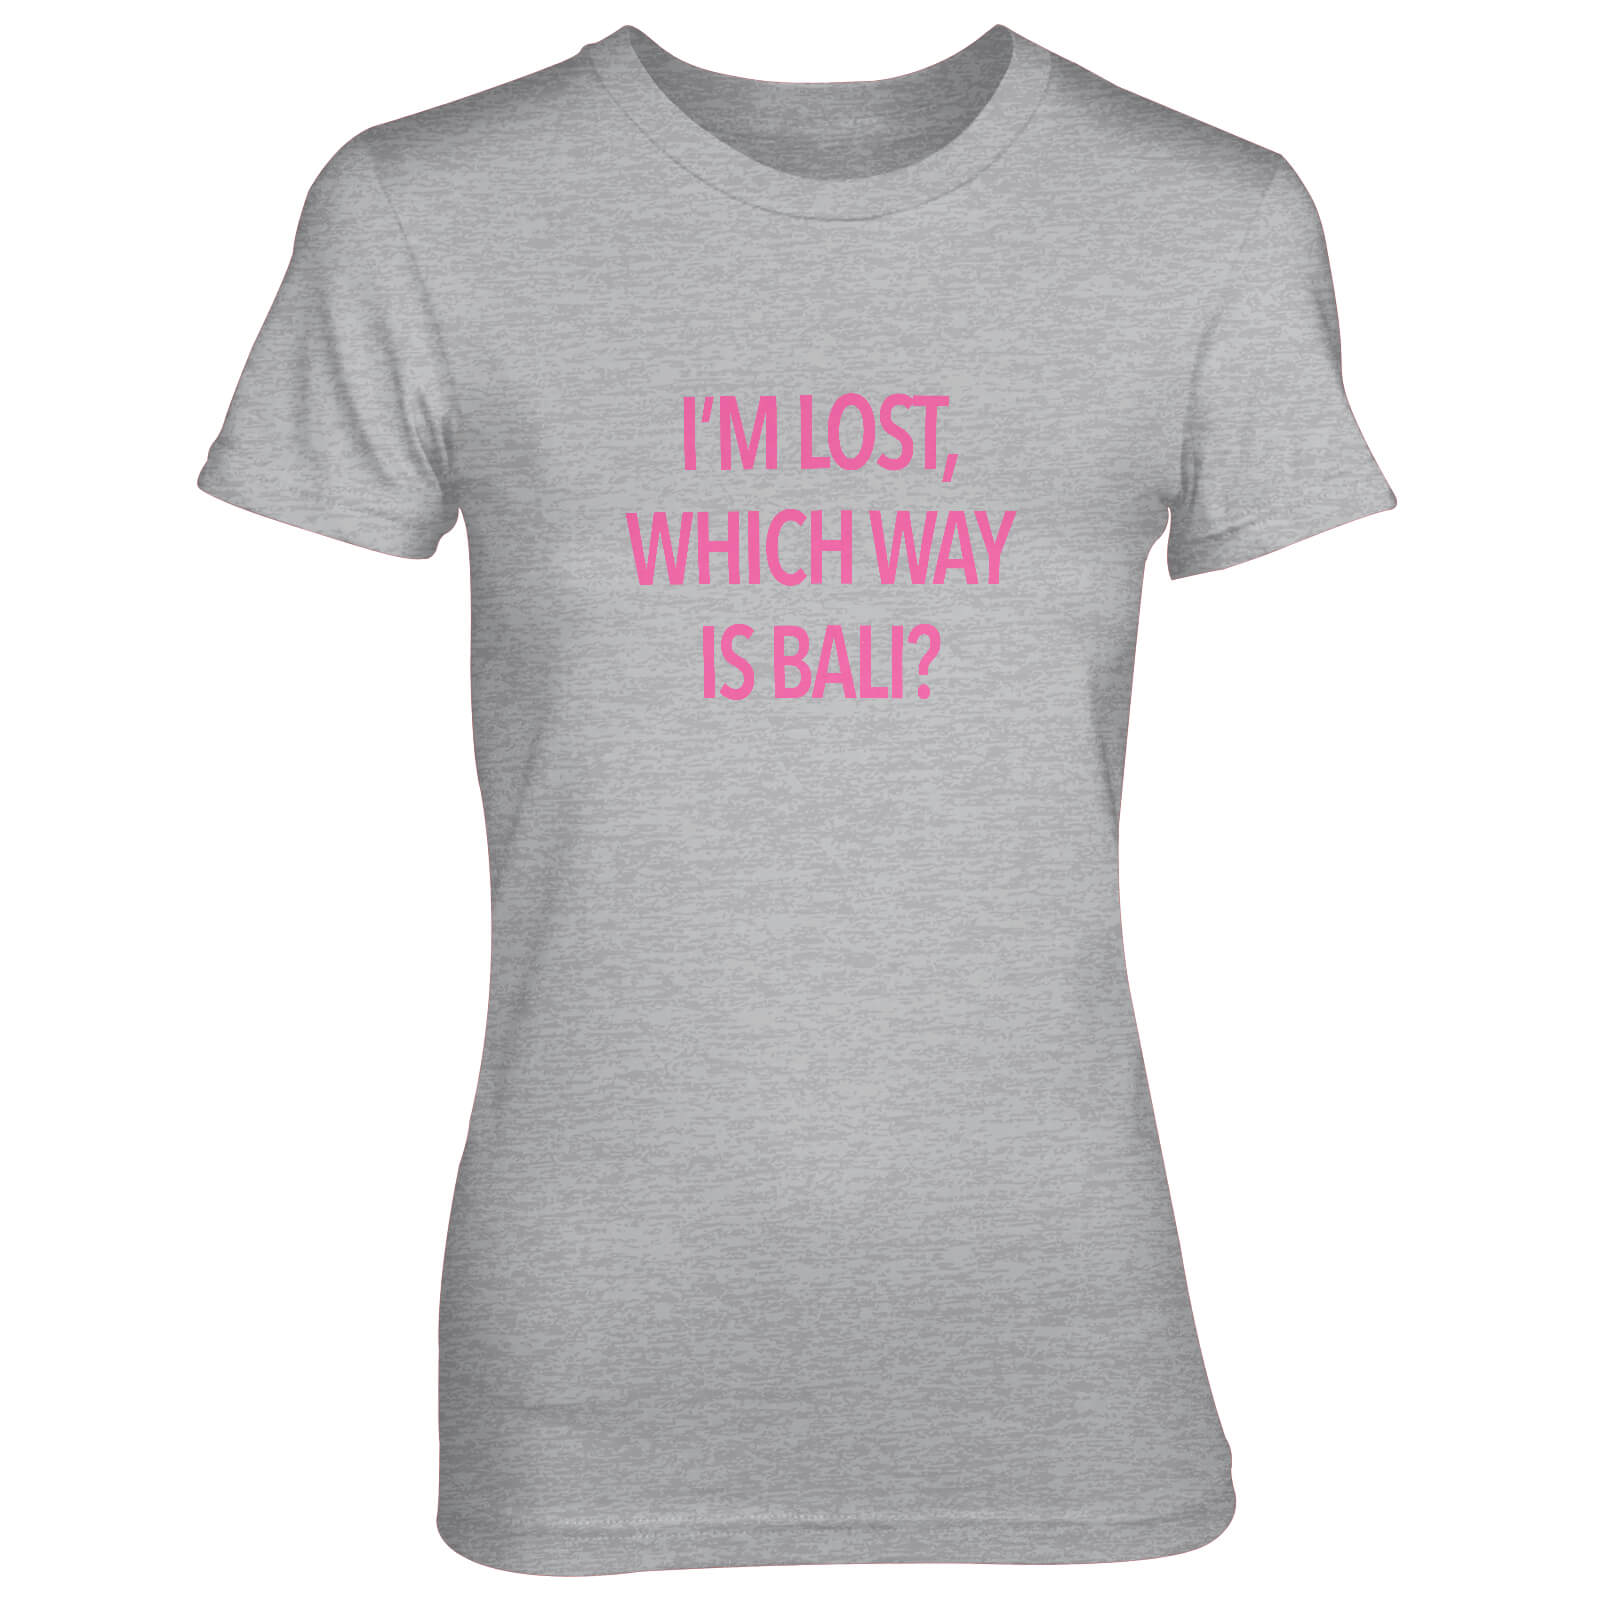 I'm Lost, Which Way Is Bali Women's Grey T-Shirt - S - Grey